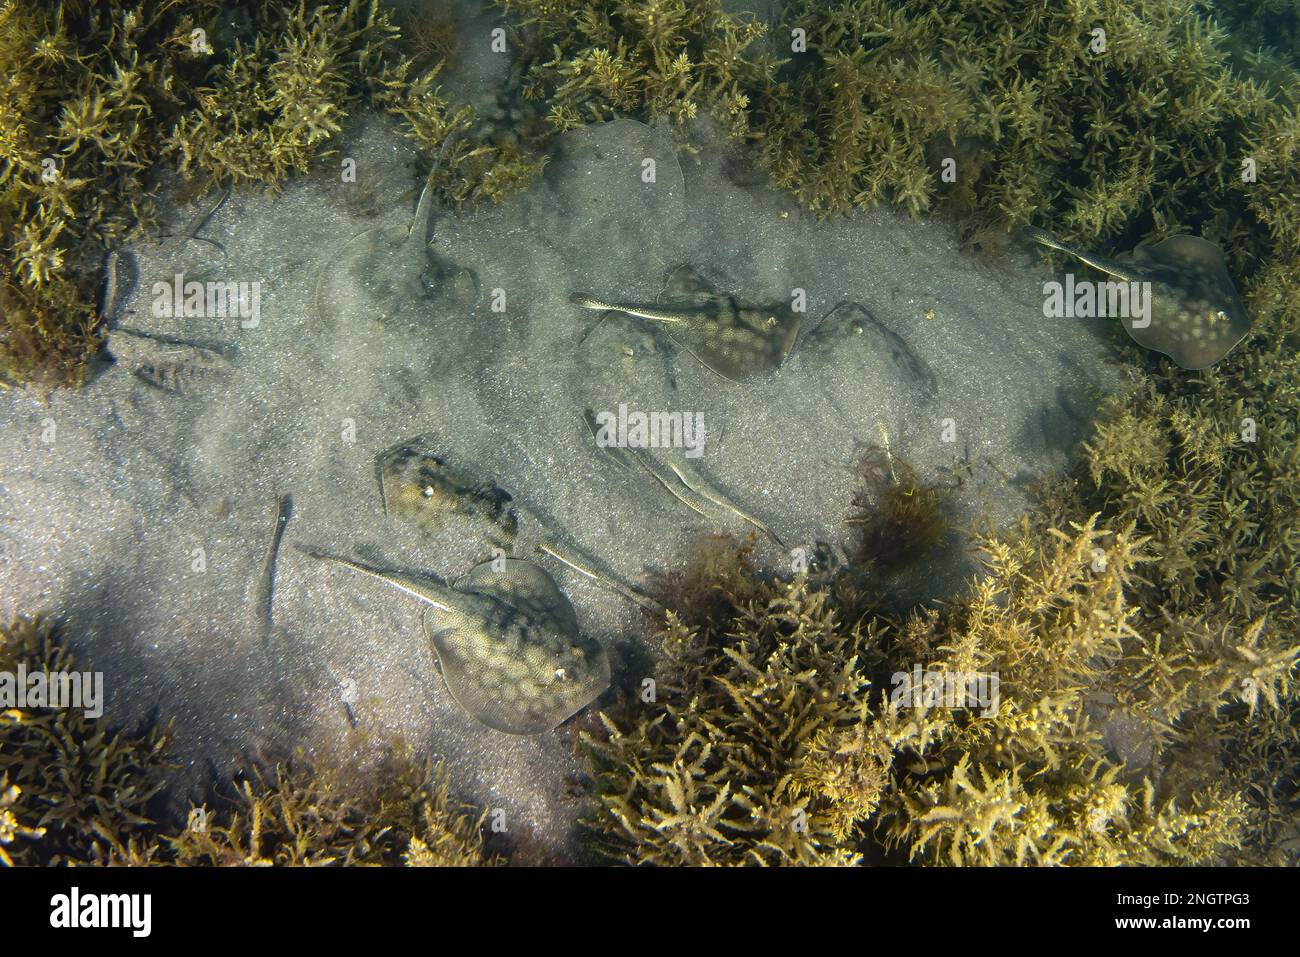 Nursery of many Stingray in the sand underwater in th Sea of Cortez, Mexico Stock Photo